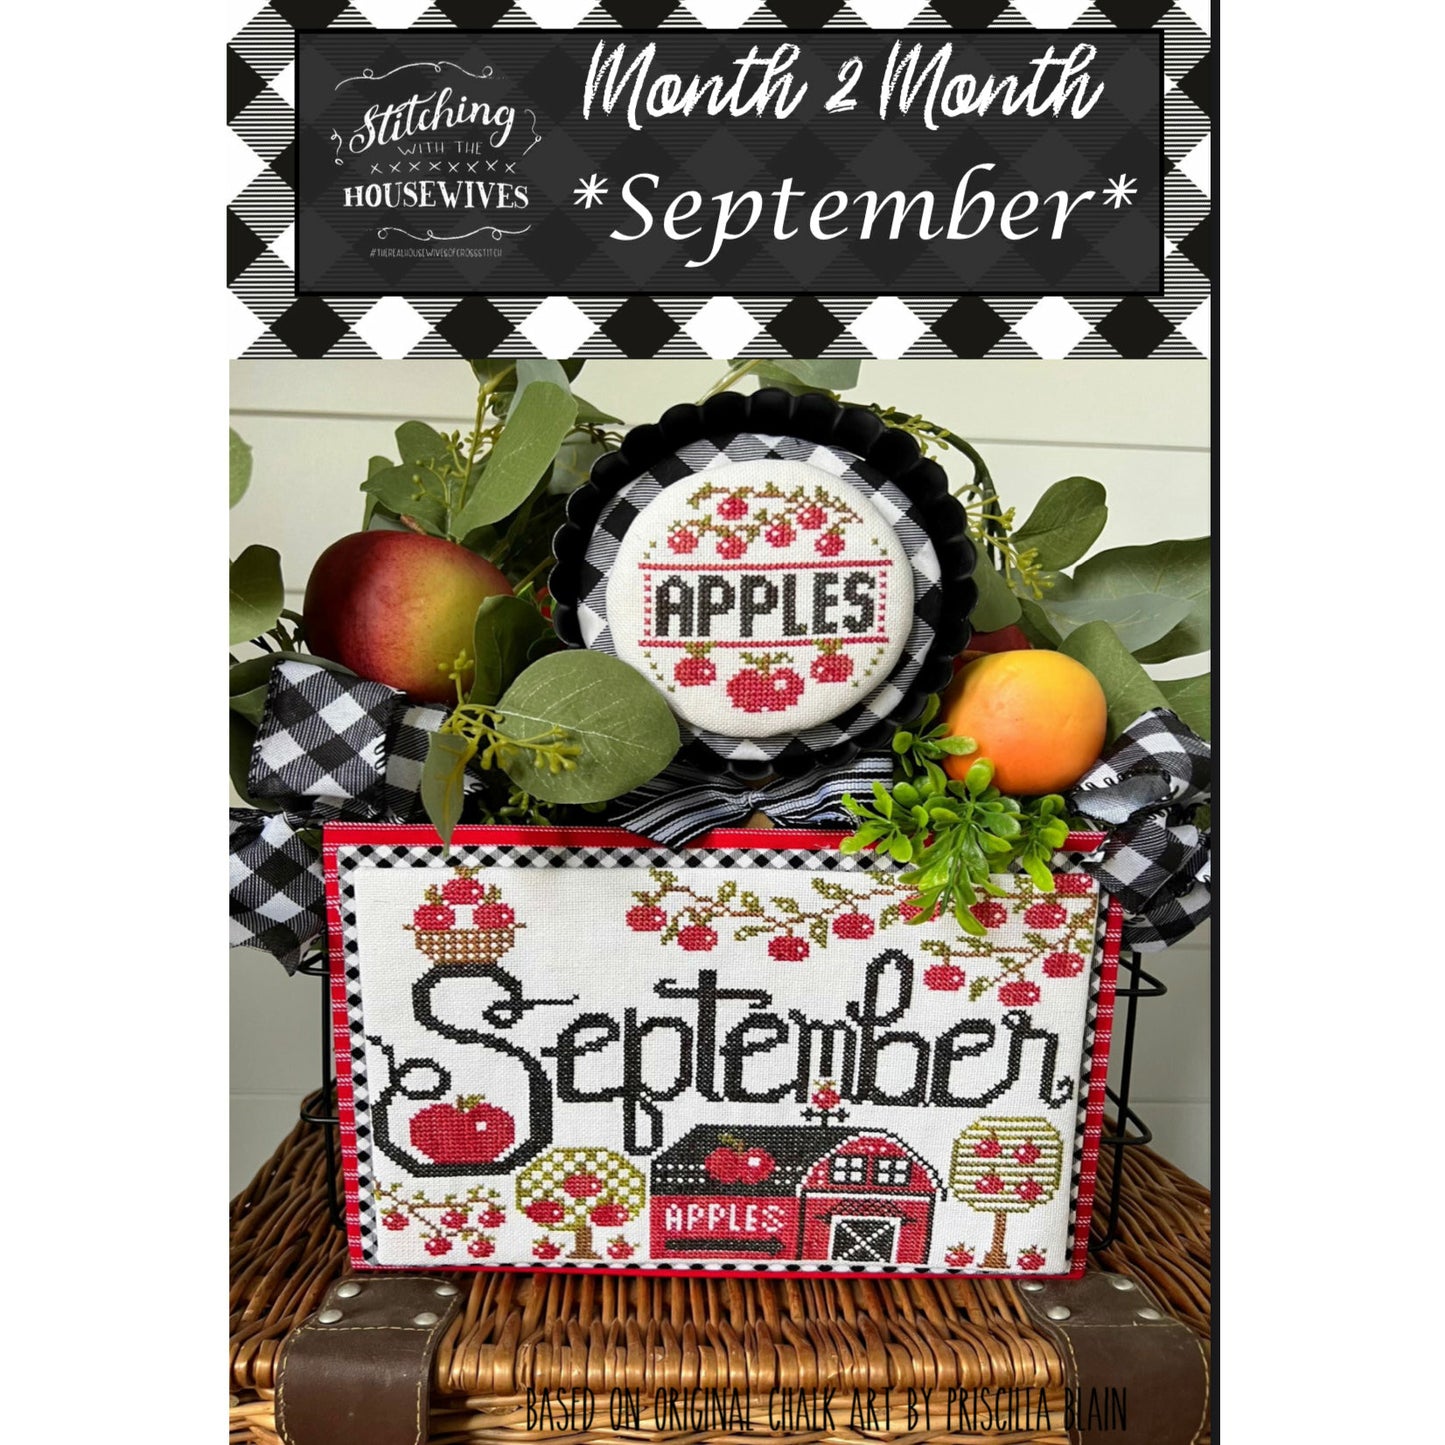 Stitching with the Housewives ~ Month 2 Month - September Pattern